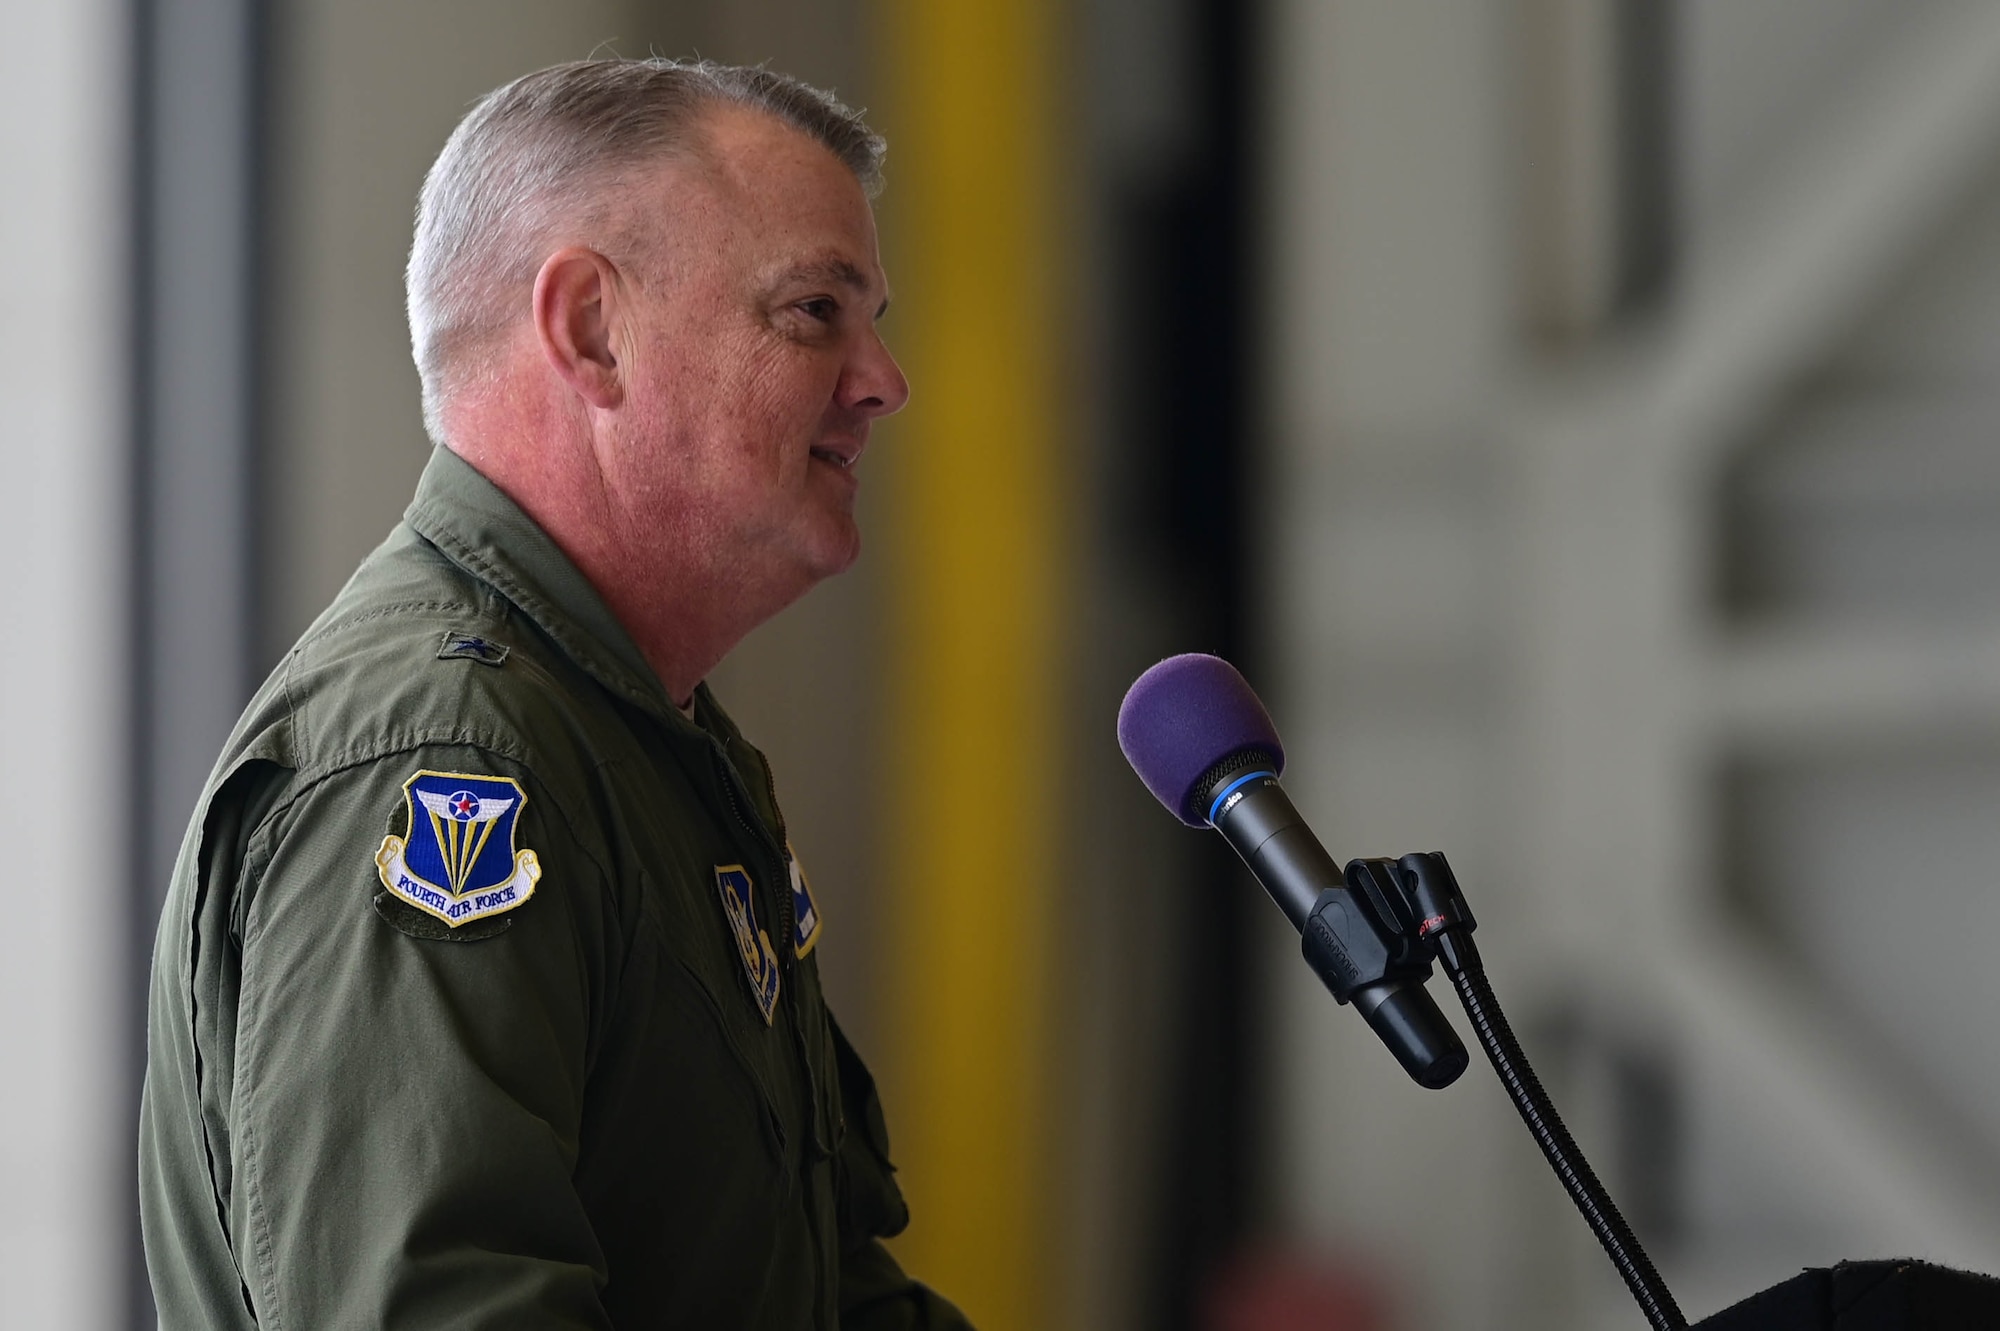 A general in a flight suit gives a speech at a podium on a stage in a hangar during a ceremony.